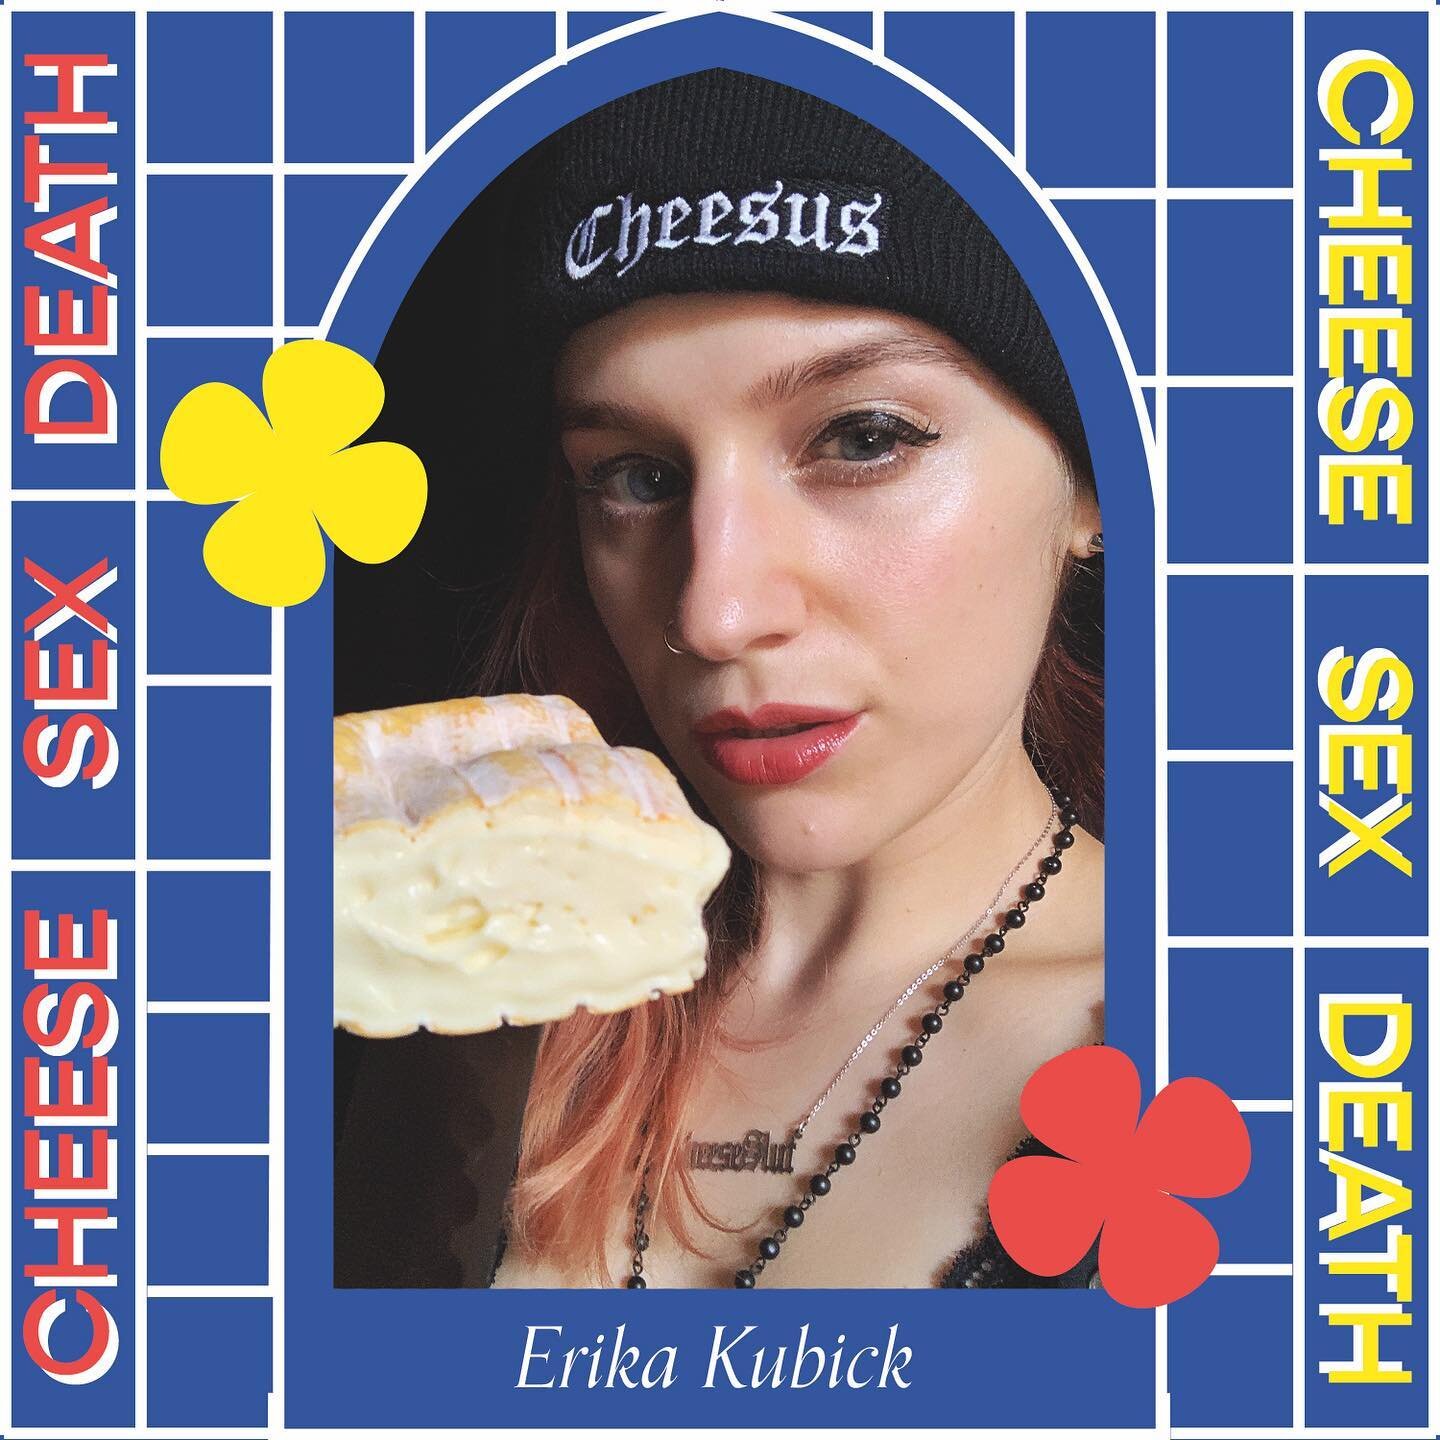 Erika Kubick loves cheese &mdash; Enough so that she decided to write a book about it, fashioned after the Holy Bible. The Old Testament covers age-old techniques and information about funky fromages, while the New Testament covers everything you nee